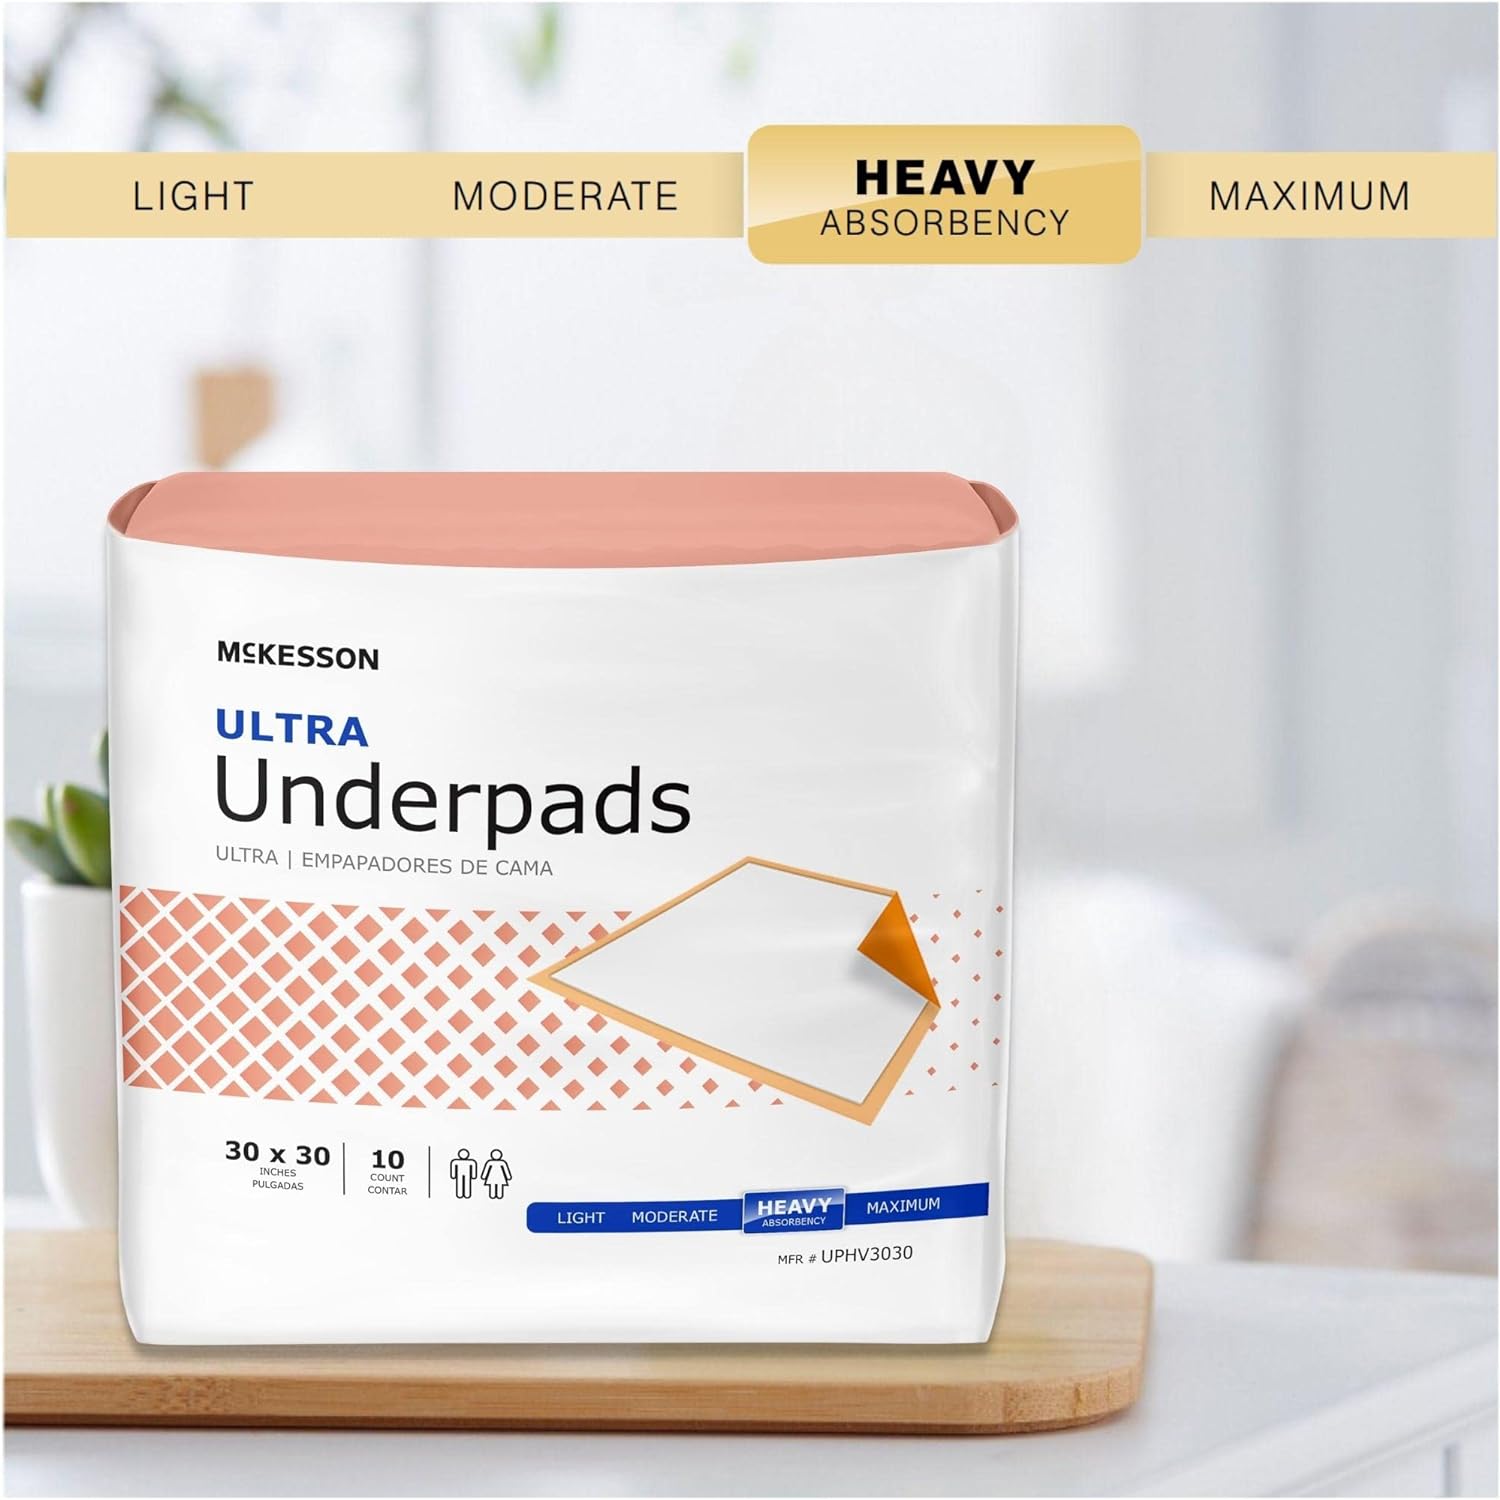 McKesson Ultra Underpads, Incontinence Bed Pads, Heavy Absorbency, 30 in x 30 in, 100 Count